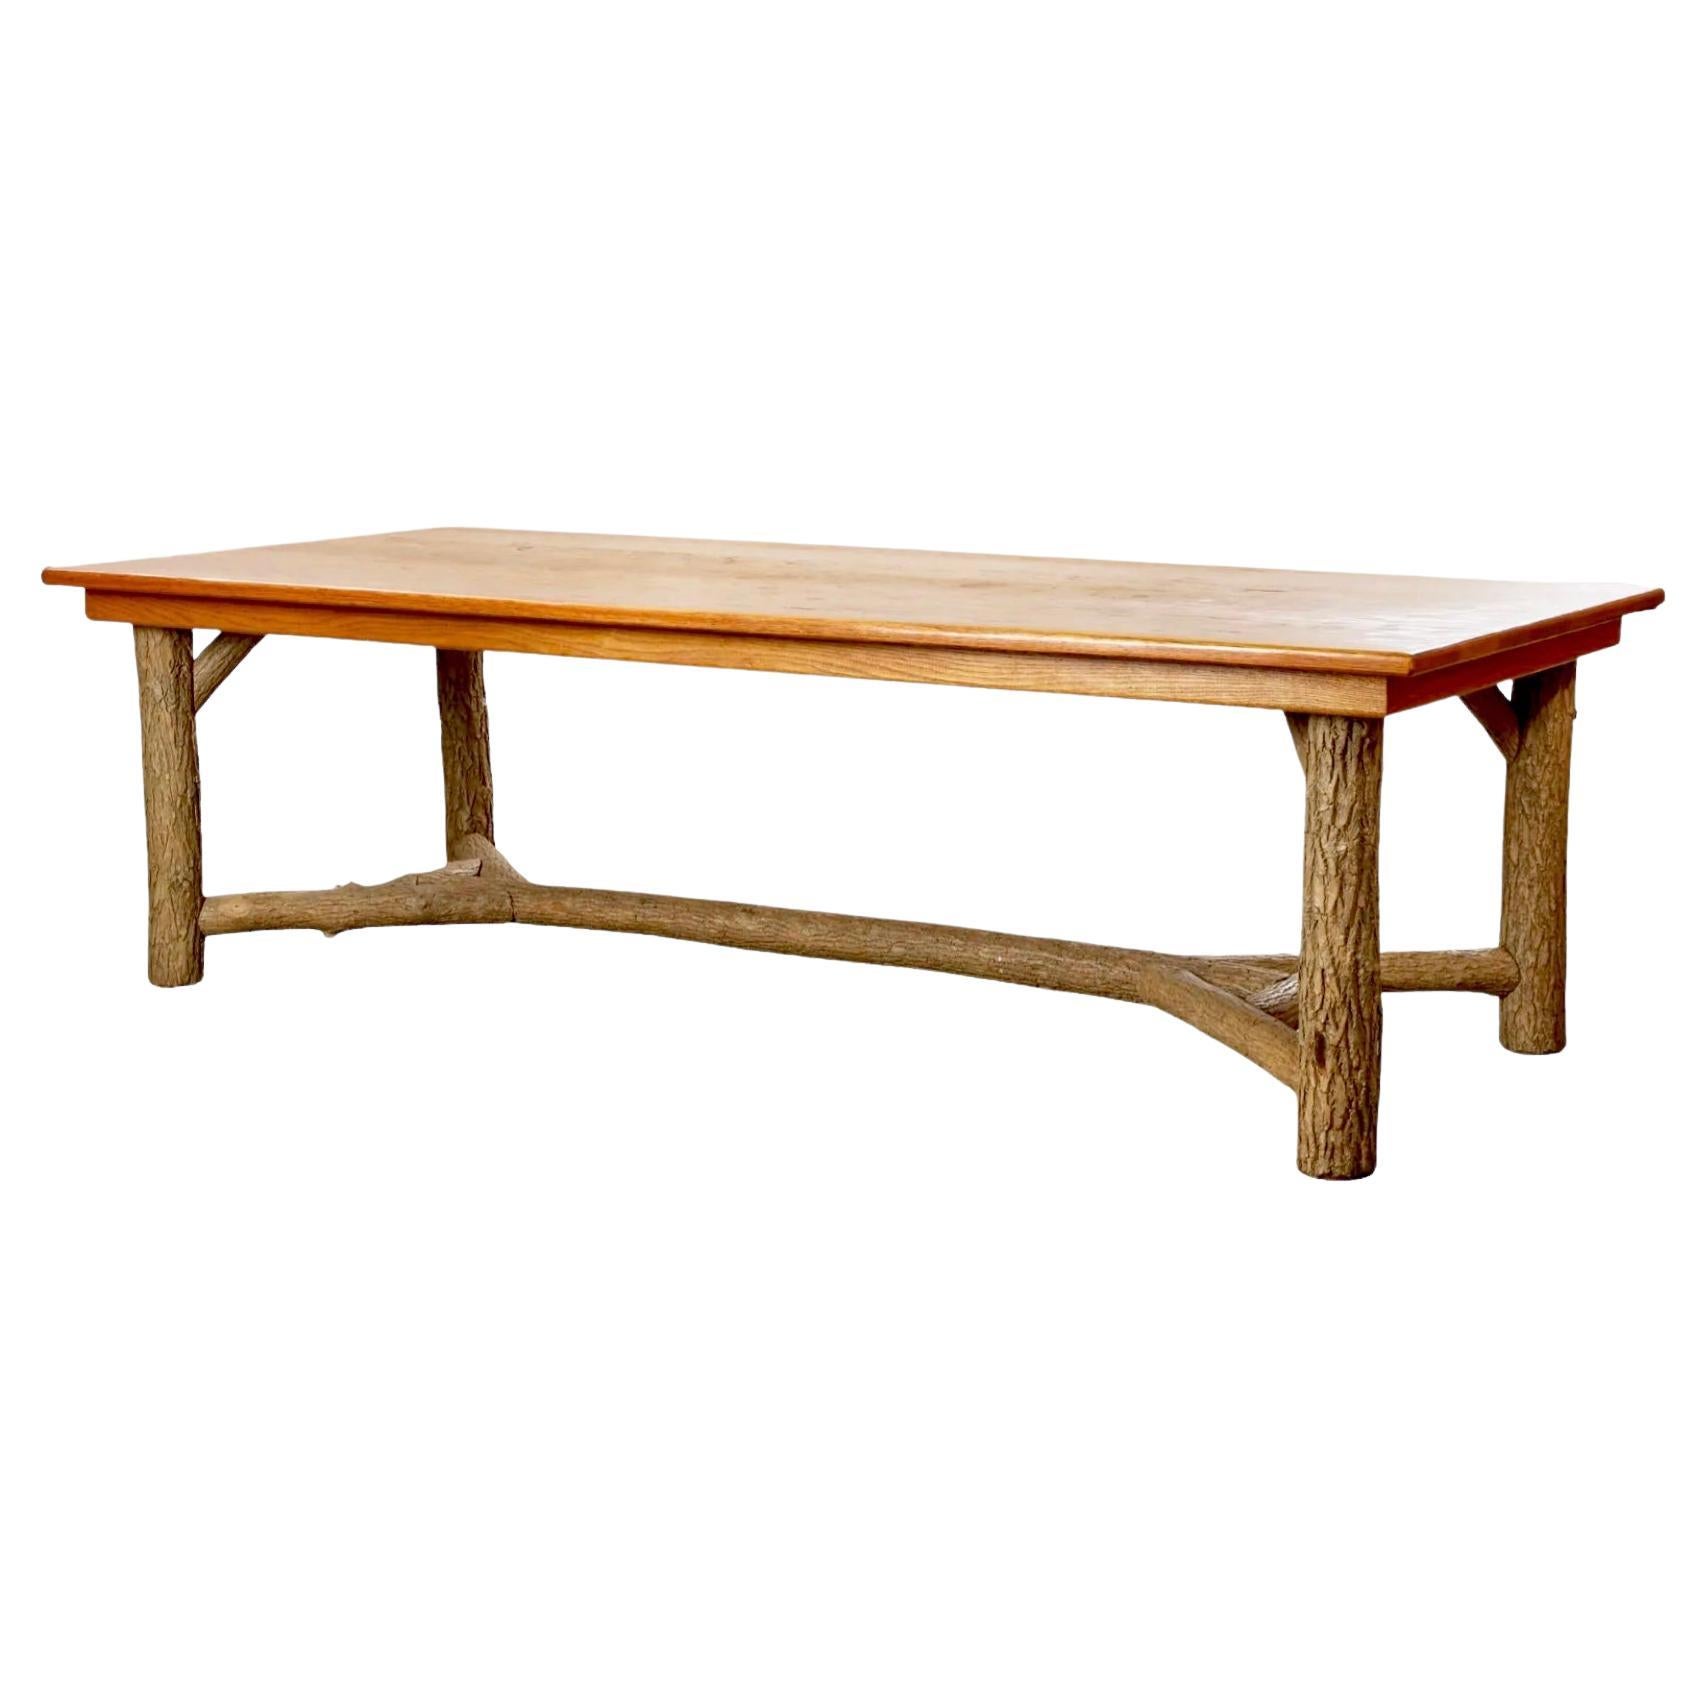 Rustic Or Primitive Faux Bois Eco-Friendly Hand Crafted La Lune Dining Table  For Sale